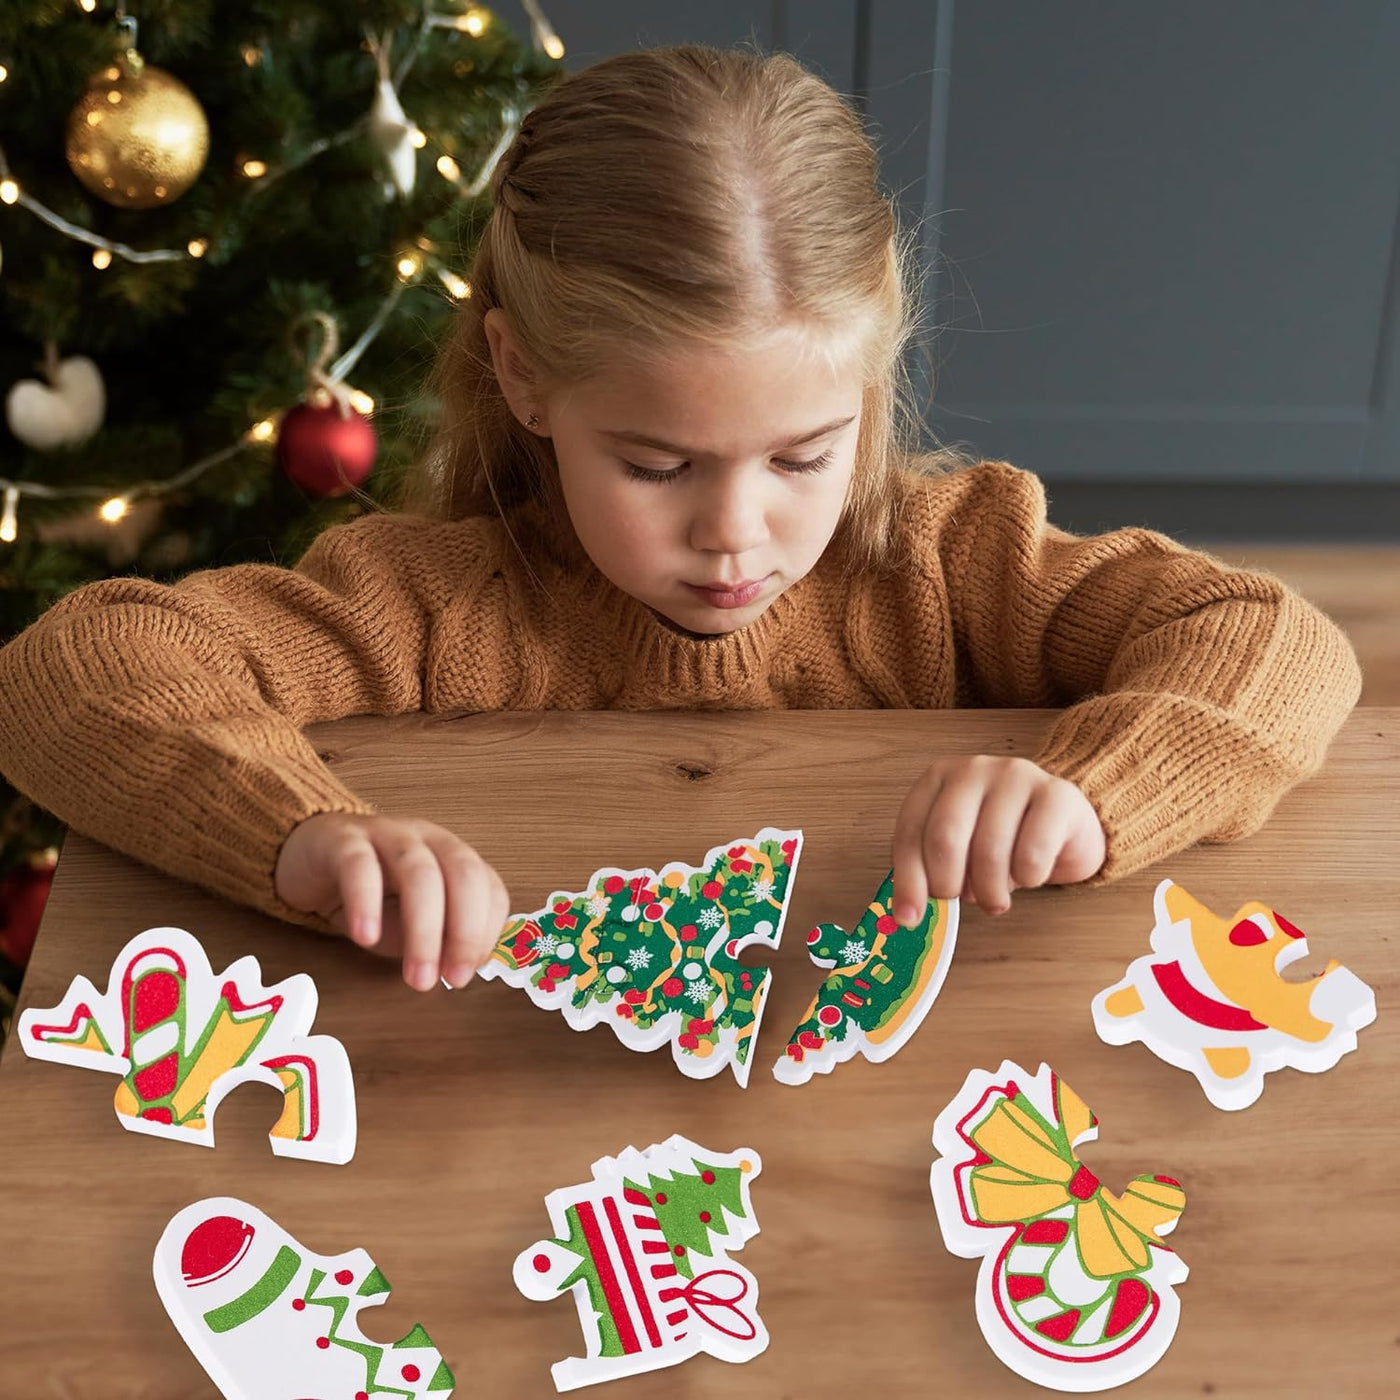 ArtCreativity Christmas Puzzle Toys for Babies - 9 Puzzles - EVA Christmas Baby Puzzle Toys for Infants That Float in Water - 9 Kids Christmas Puzzle Designs - Holiday Stocking Stuffers